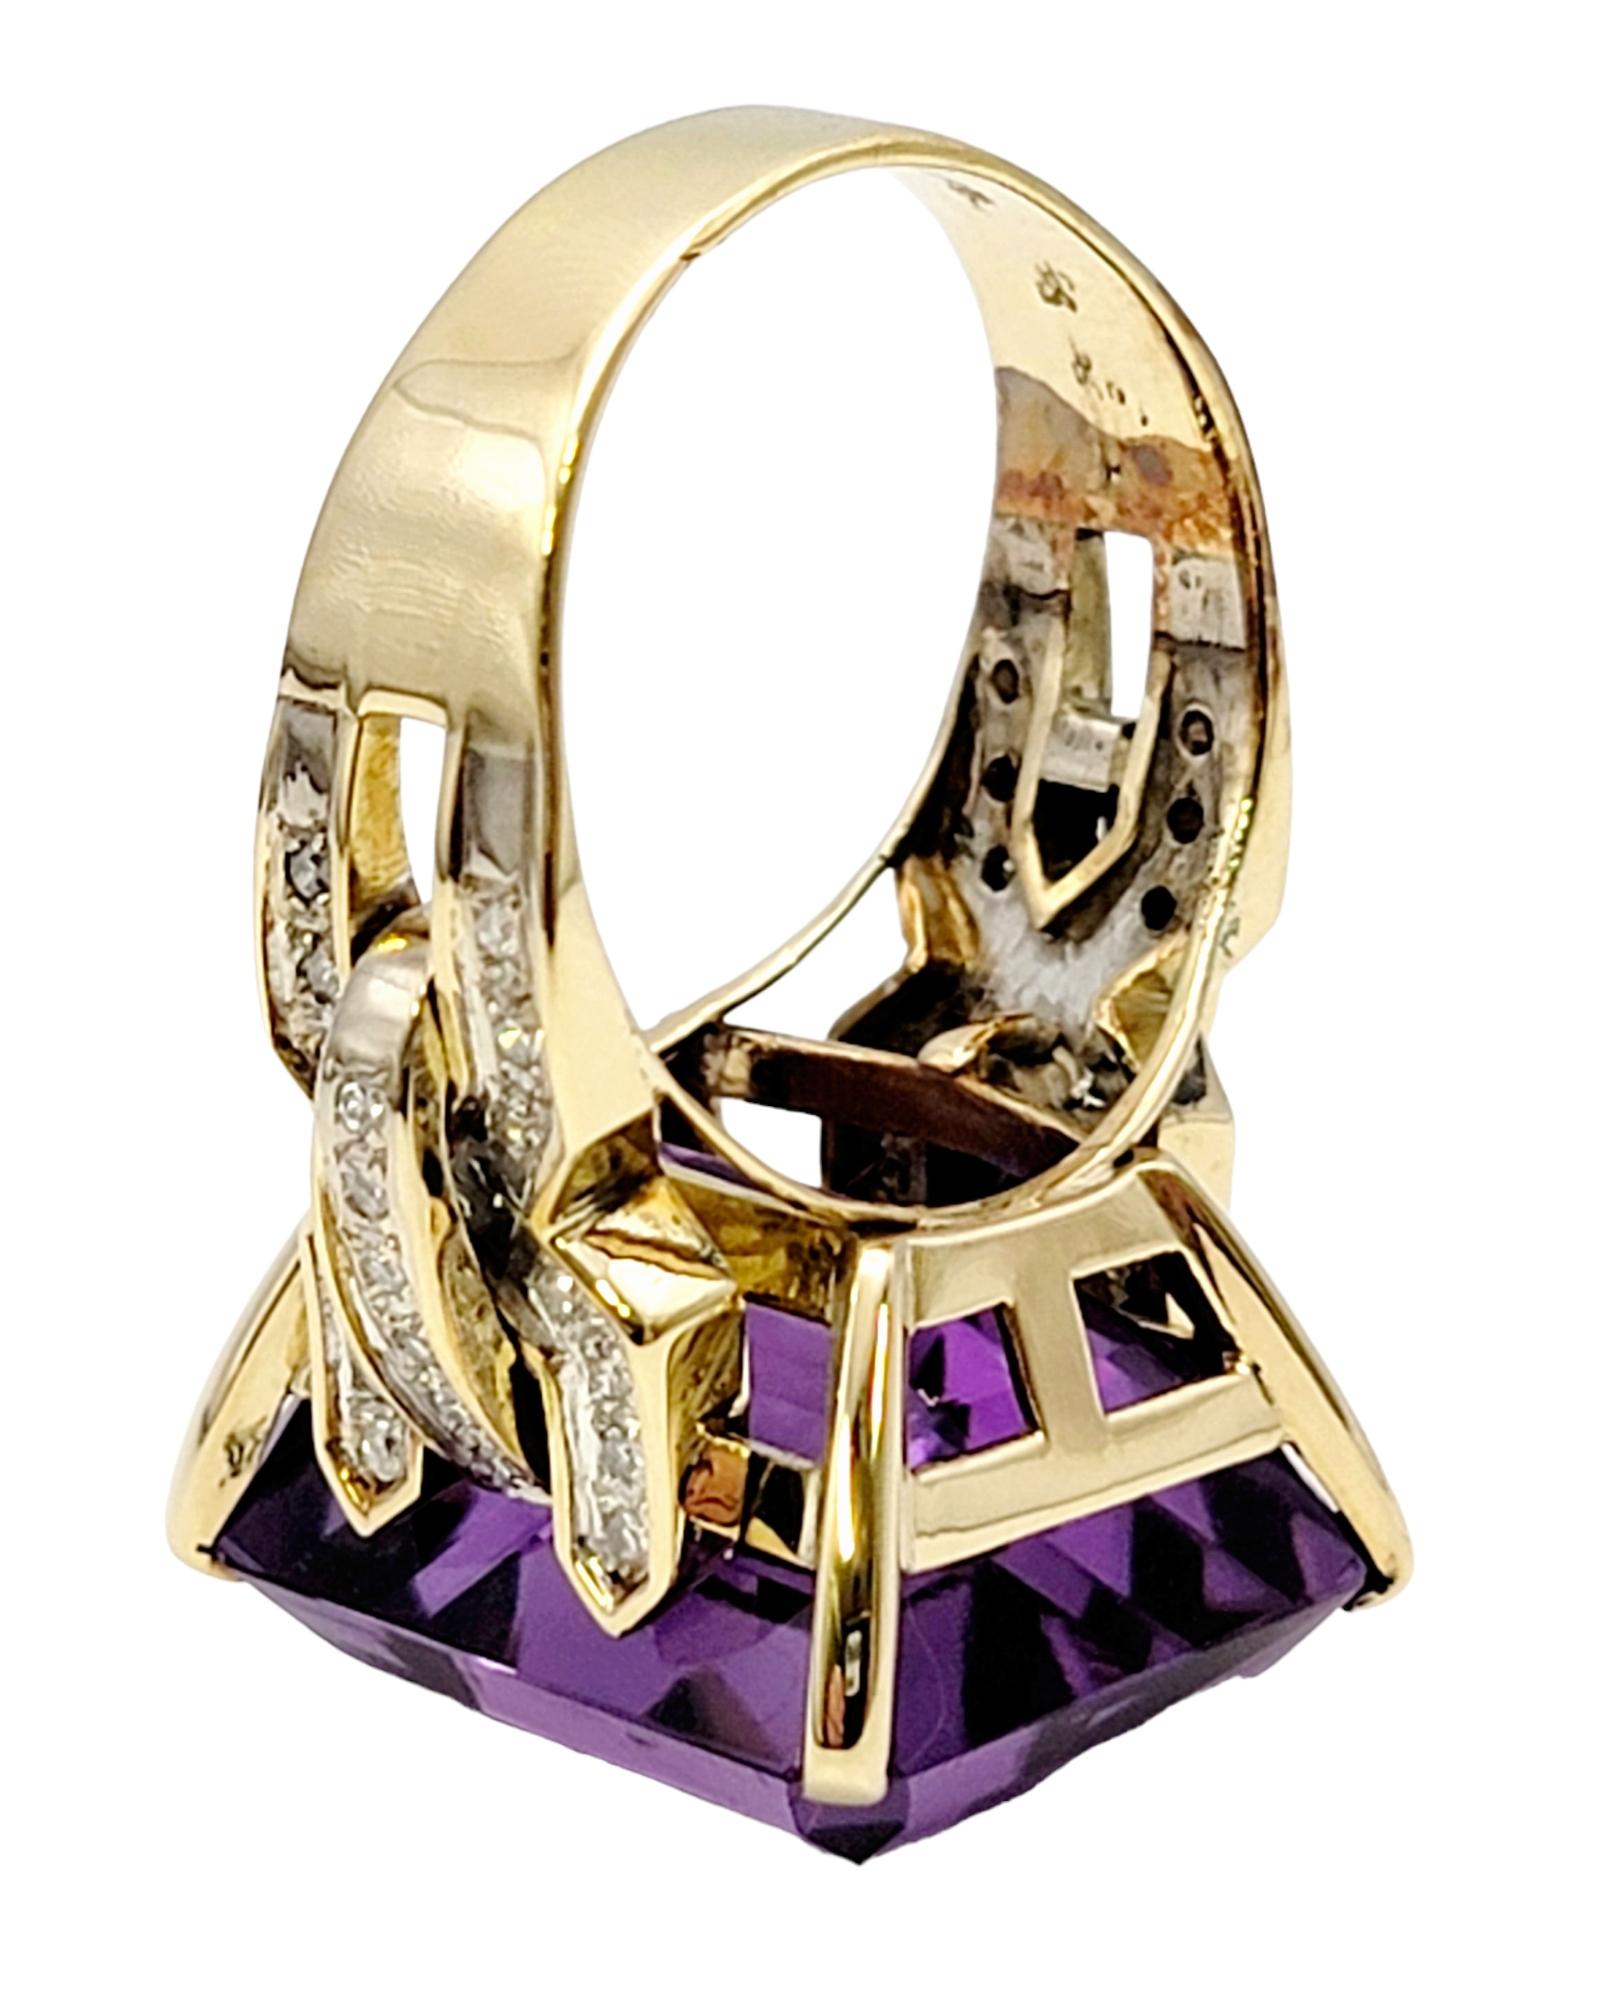 Huge 34.85 Carat Emerald Cut Amethyst Cocktail Ring with Side Diamond Detailing For Sale 1